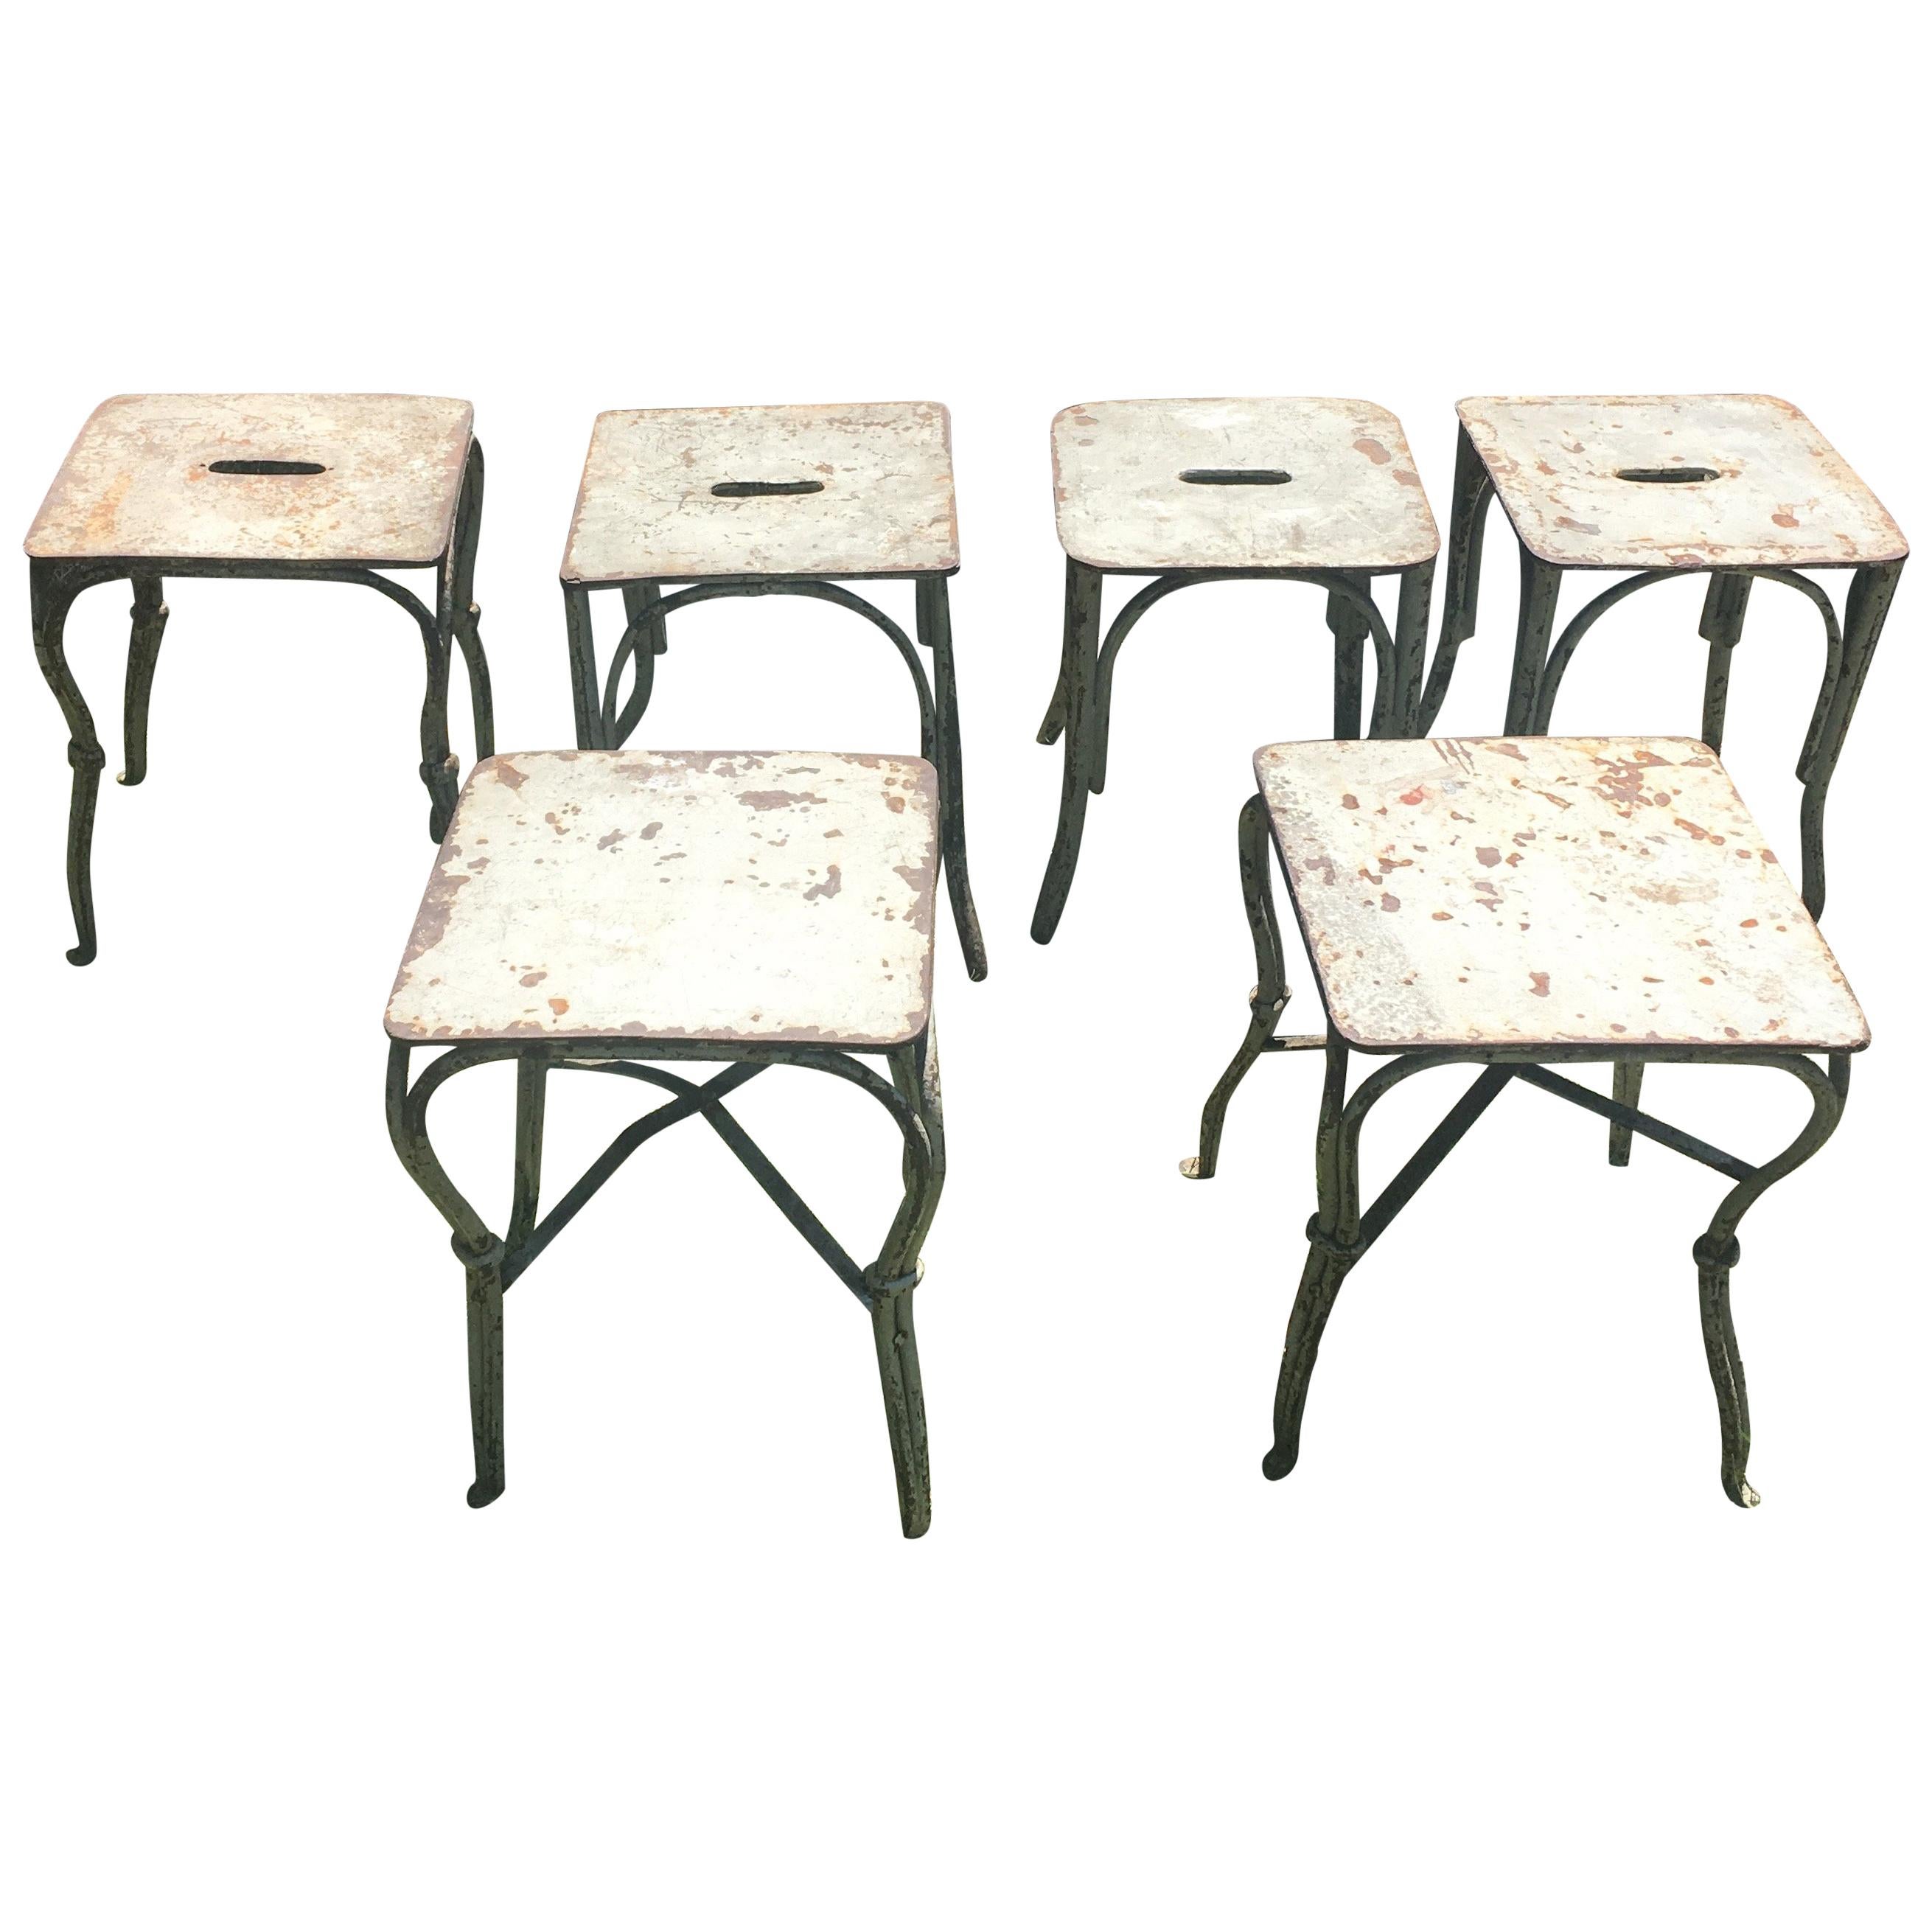 Four French Wrought Iron Garden Stools or Side Tables